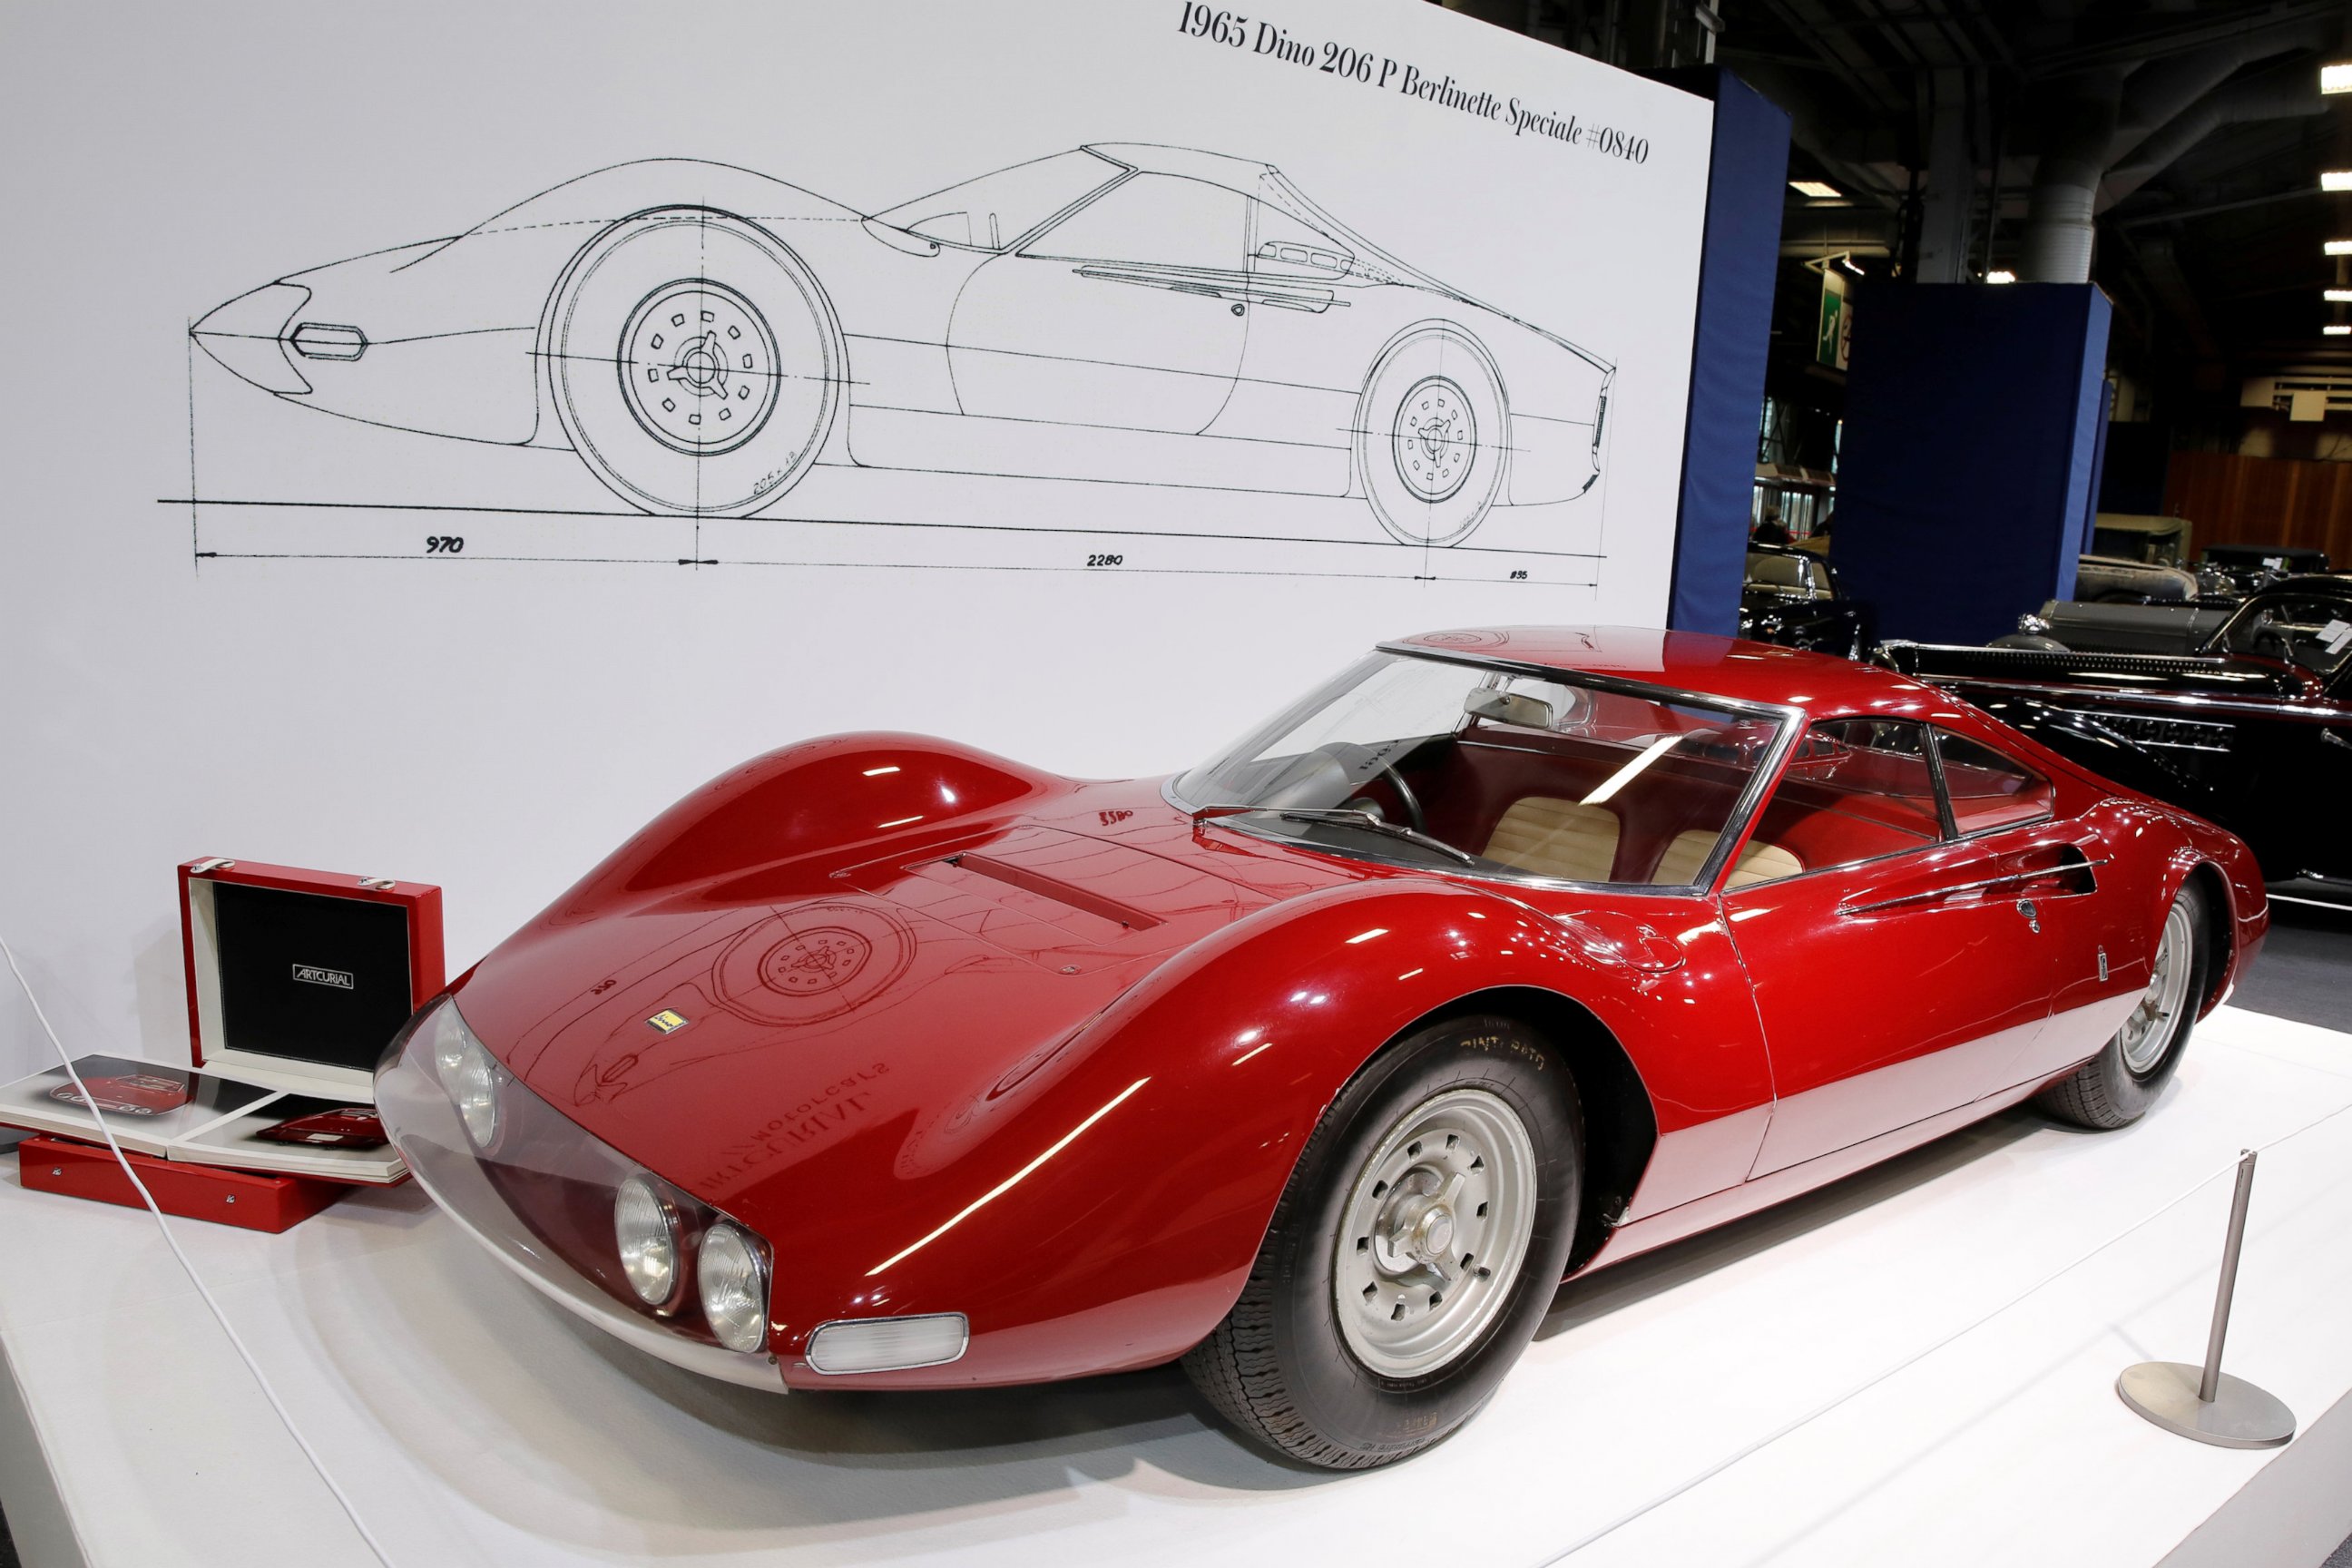 PHOTO: A 1965 Ferrari 206 P Dino Pininfarina Berlinetta Speciale is displayed during an exhibition of vintage and classic cars by Artcurial auction house at the Paris Retromobile fair in Paris, France, Feb. 8, 2017.